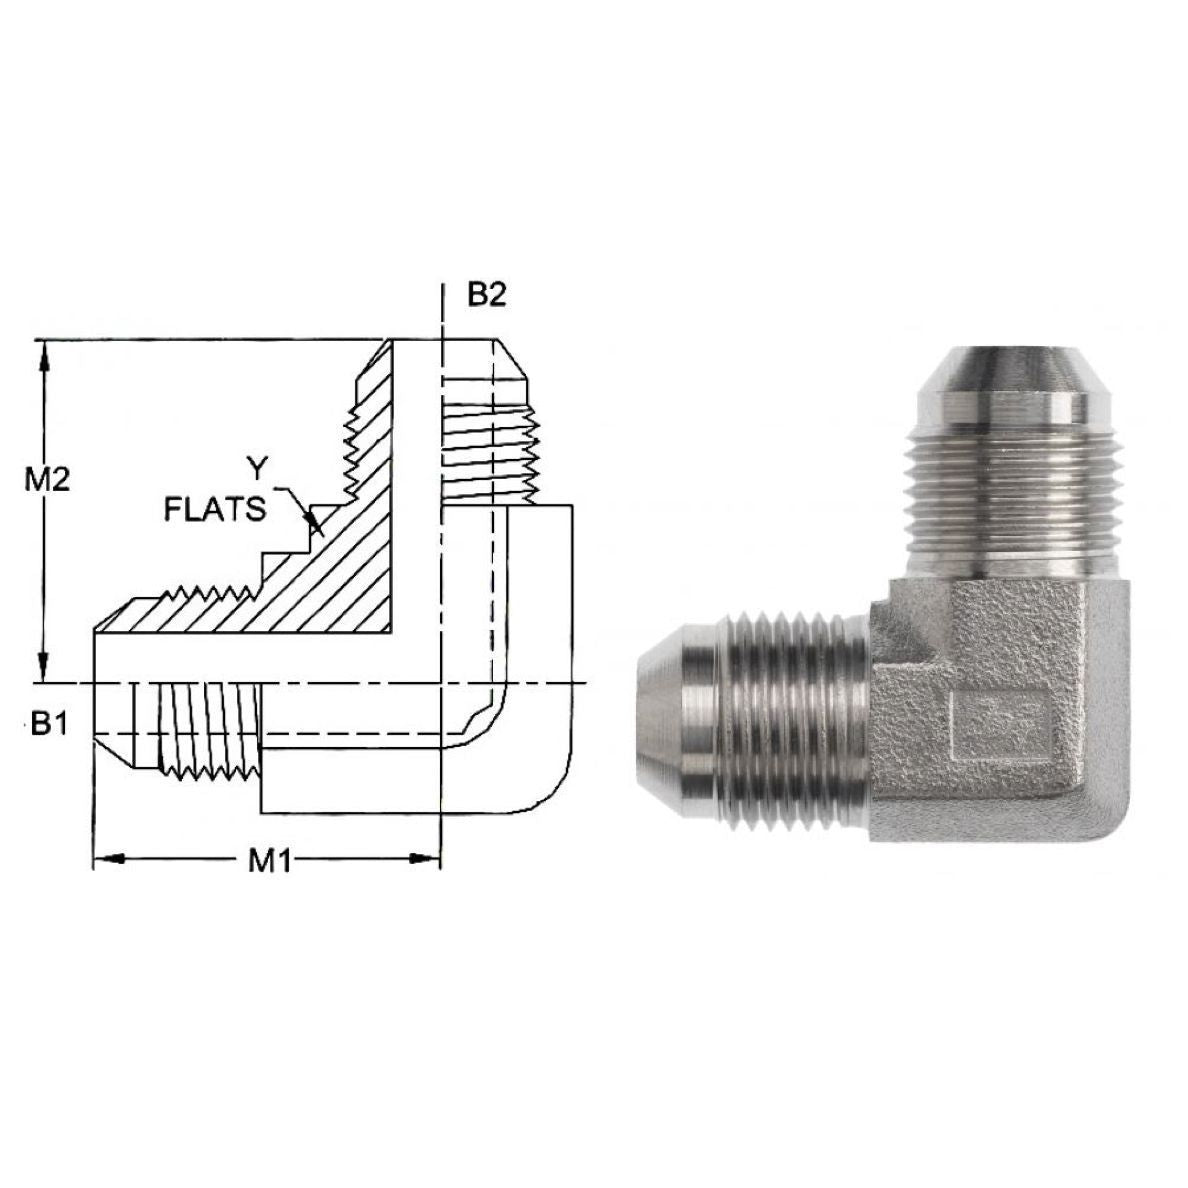 2500-04-04-SS : OneHydraulics 90-Degree Elbow, 0.25 (1/4) Male JIC x 0.25 (1/4) Male JIC, Stainless Steel, 9000psi